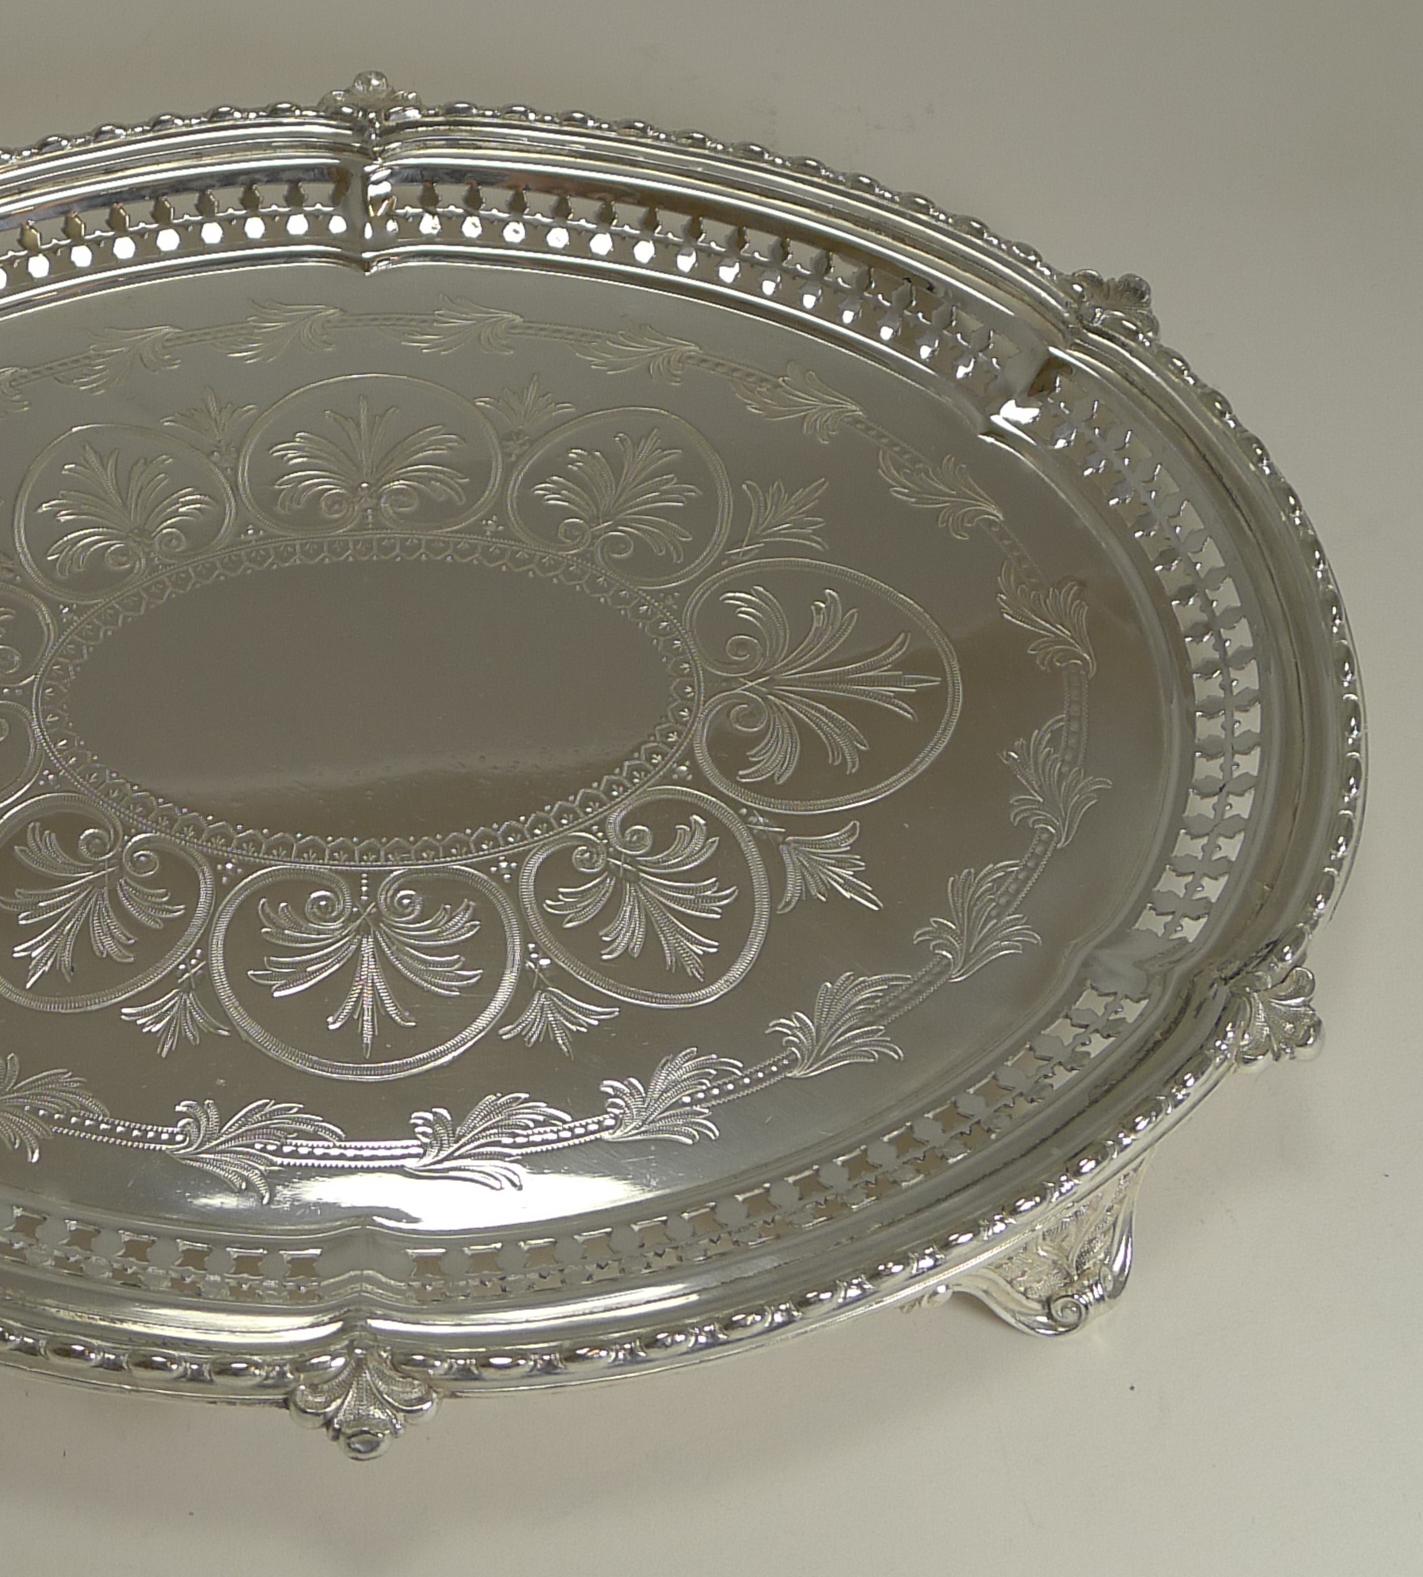 A fabulous oval shaped Victorian tray or salver standing on four very elegantly decorated legs. It is unusual to find a salver in this oval shape.

The side of the tray is pierced or reticulated and the base beautifully engraved and a most